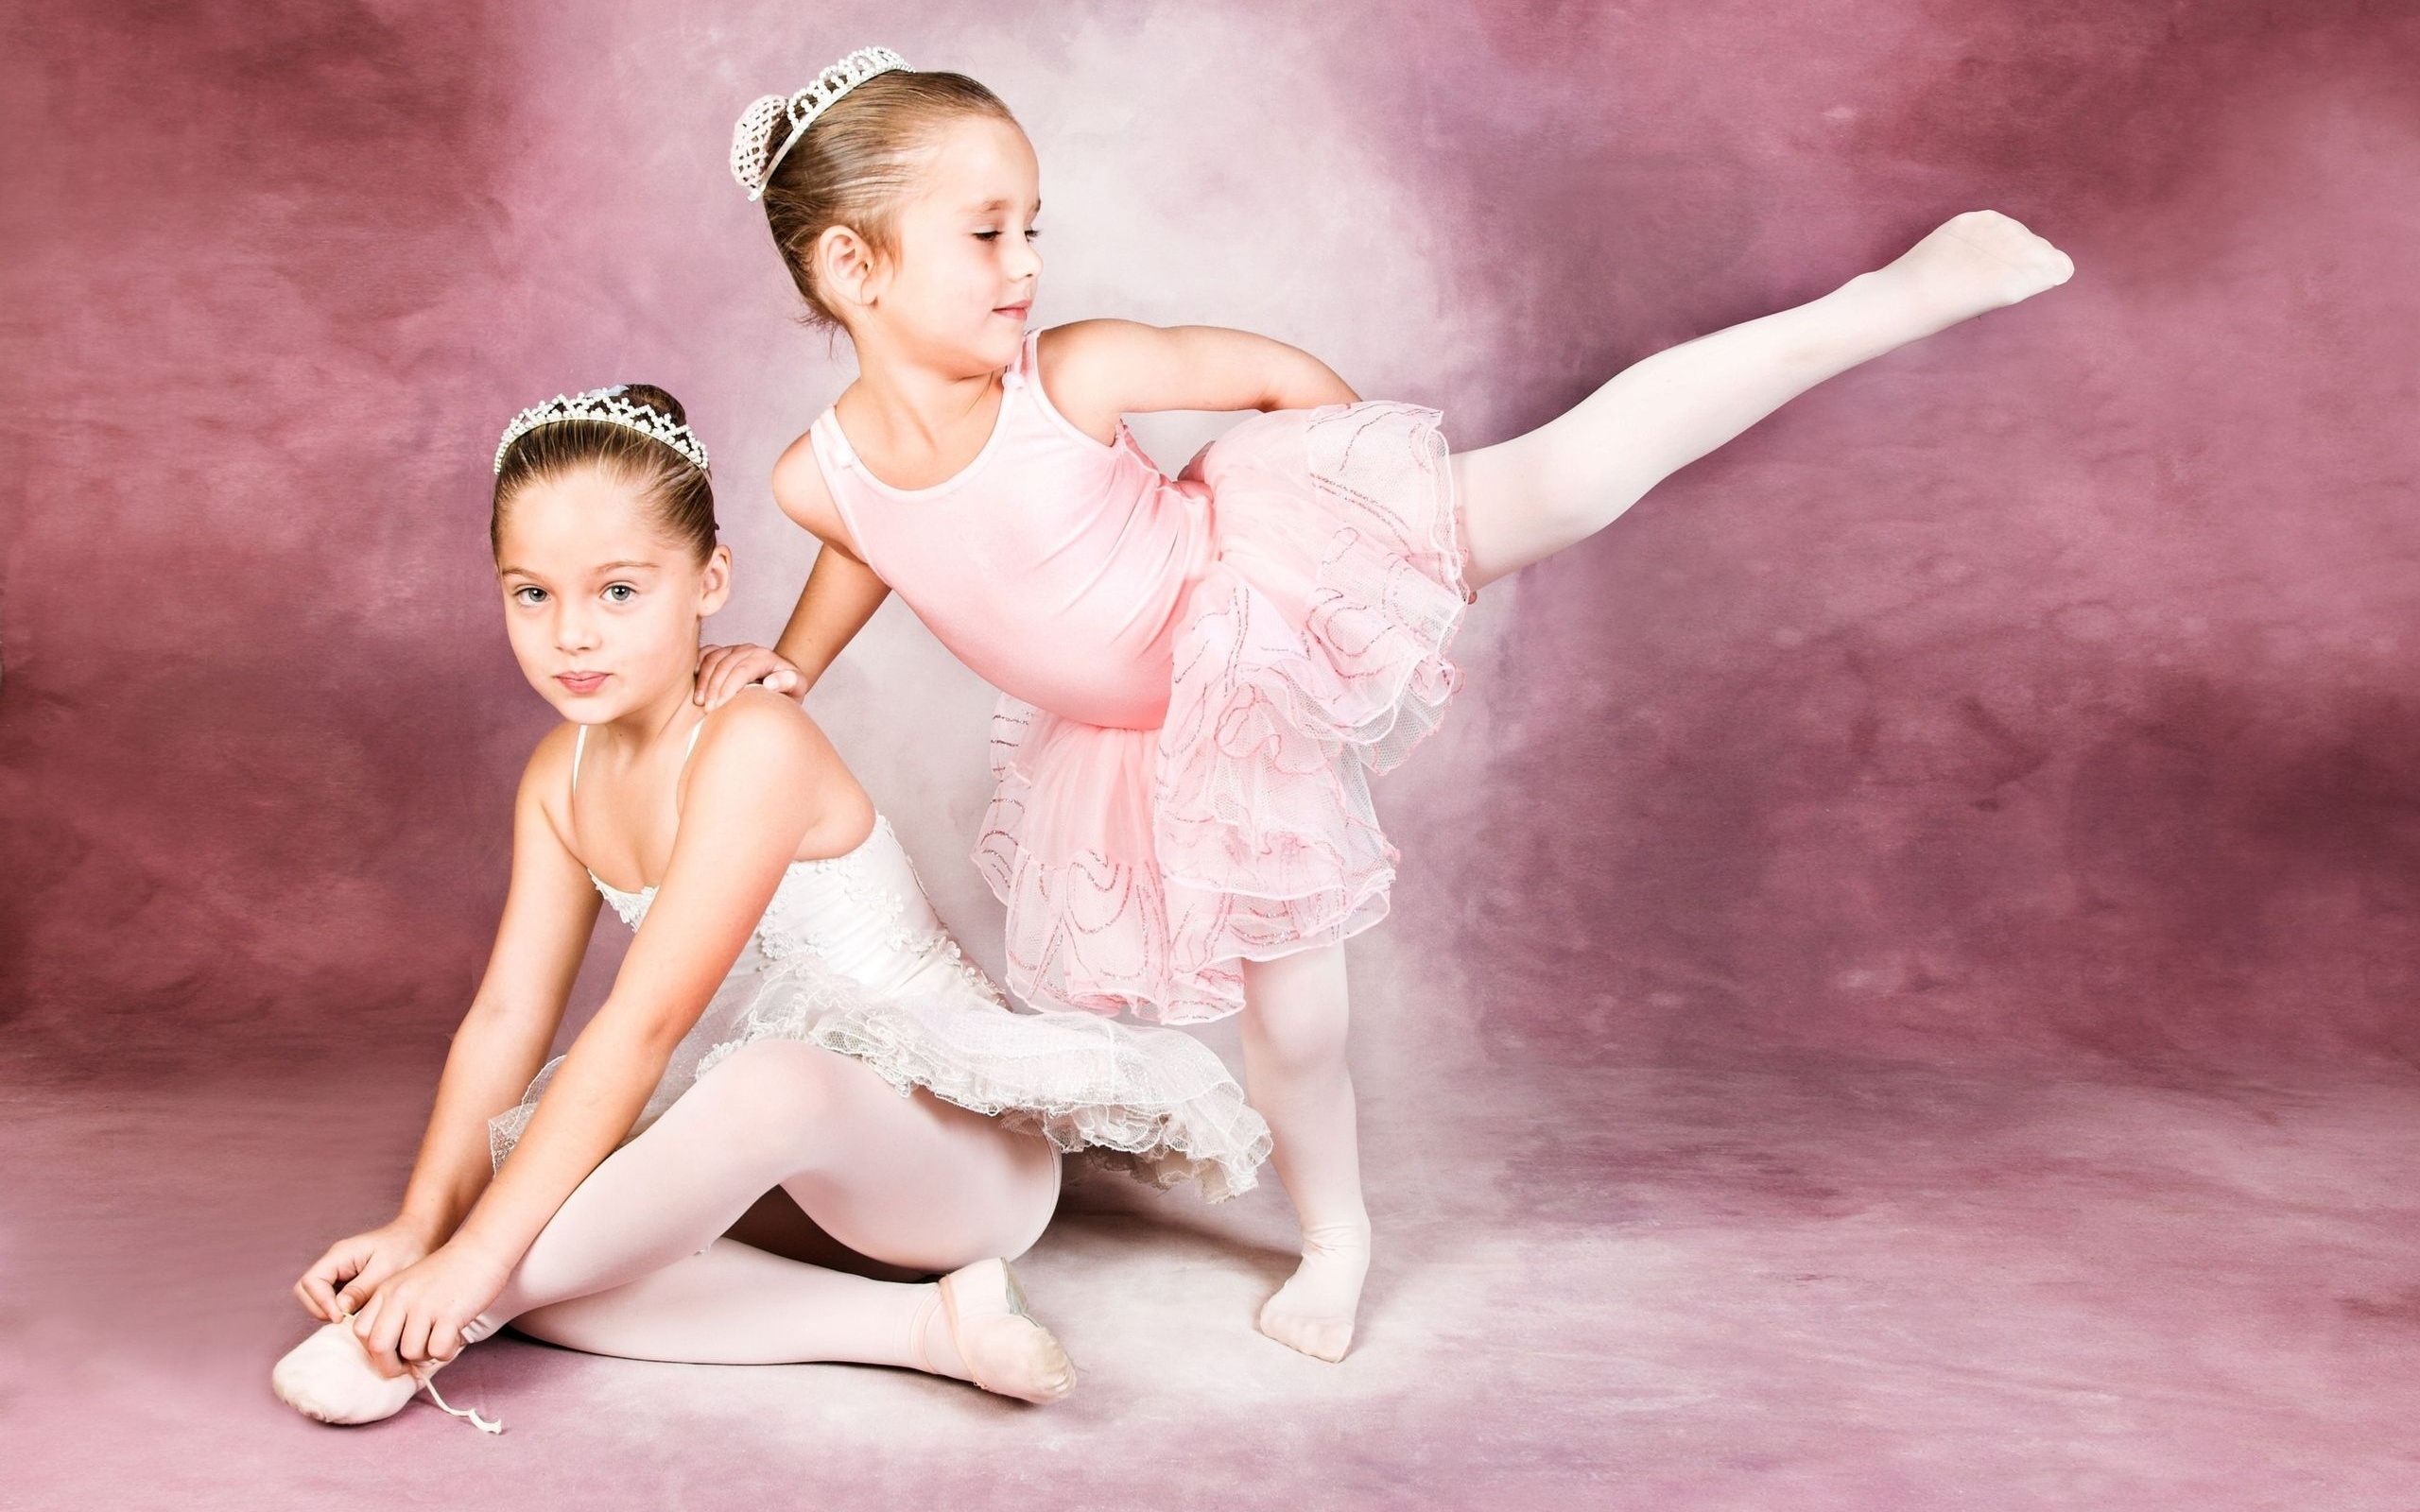 Young Ballerina Puts On Pointe Stock Image - Image of legs, model: 16922975